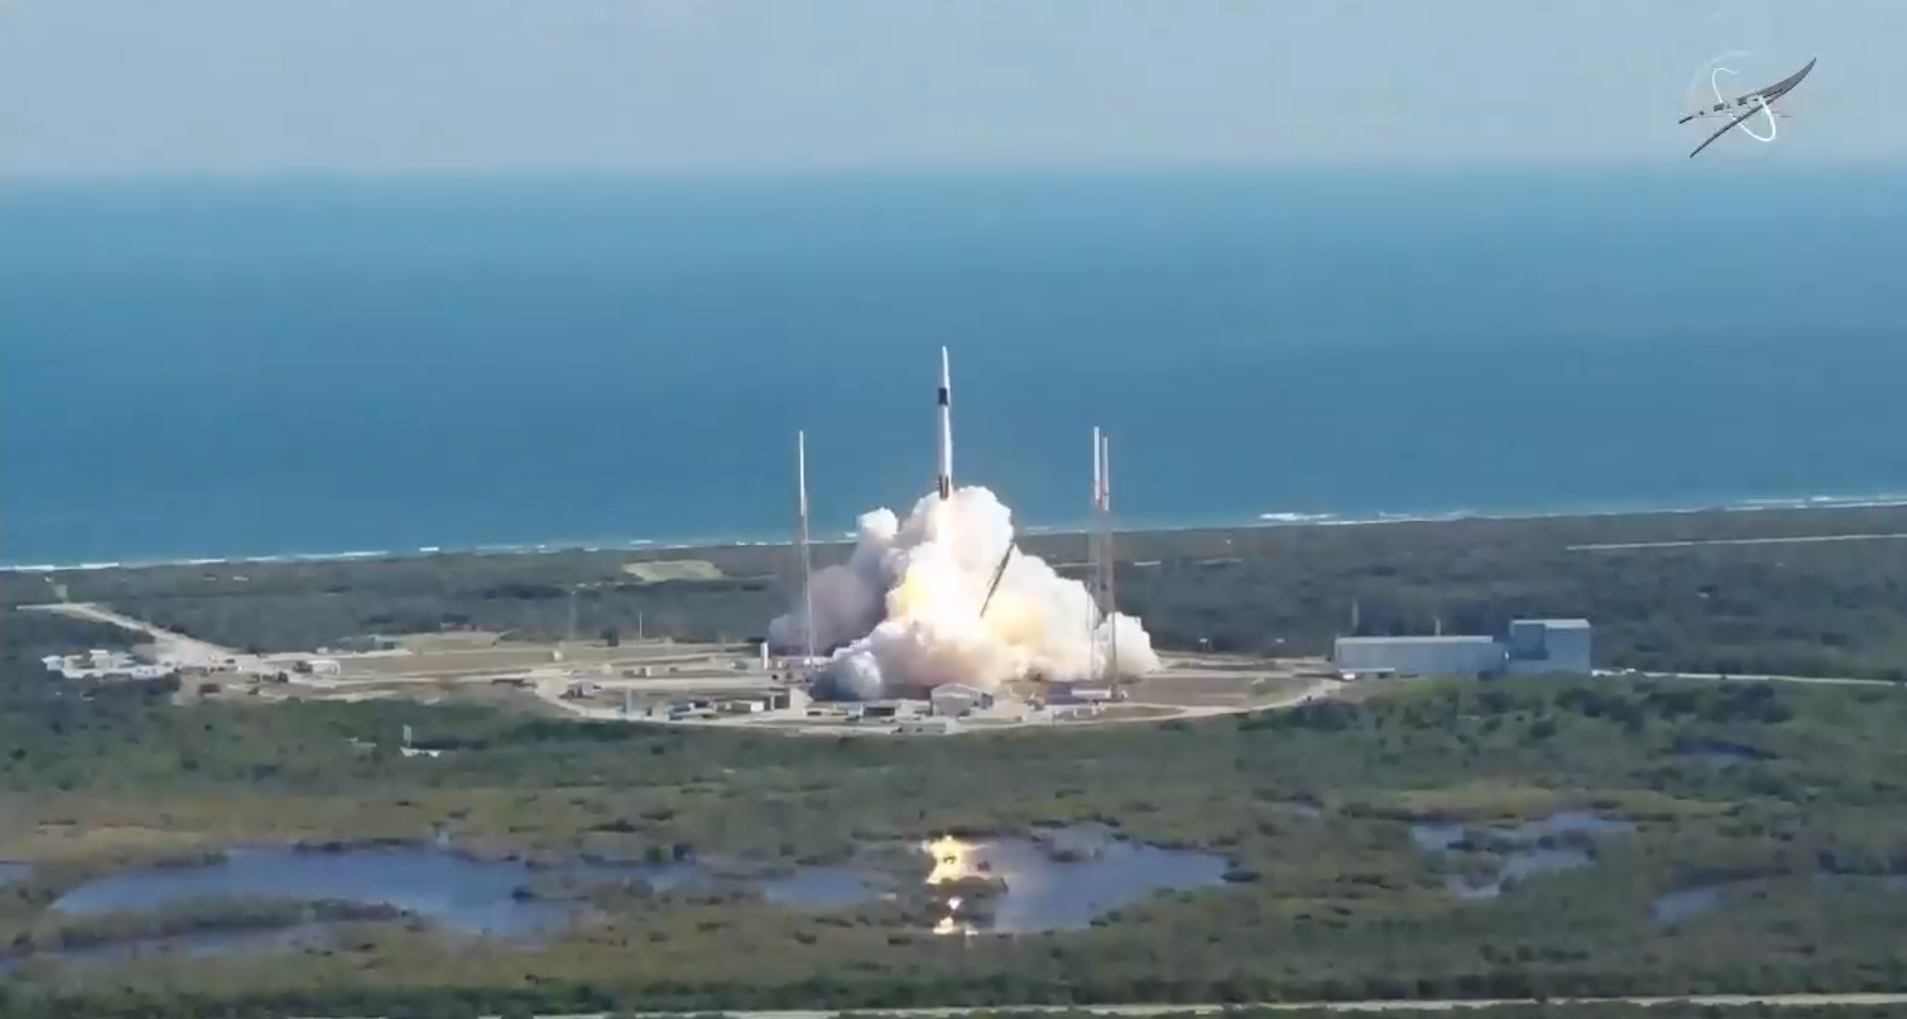 SpaceX launches its 19th cargo resupply mission to the International Space Station at 12:29 p.m. EST Dec. 5, 2019.